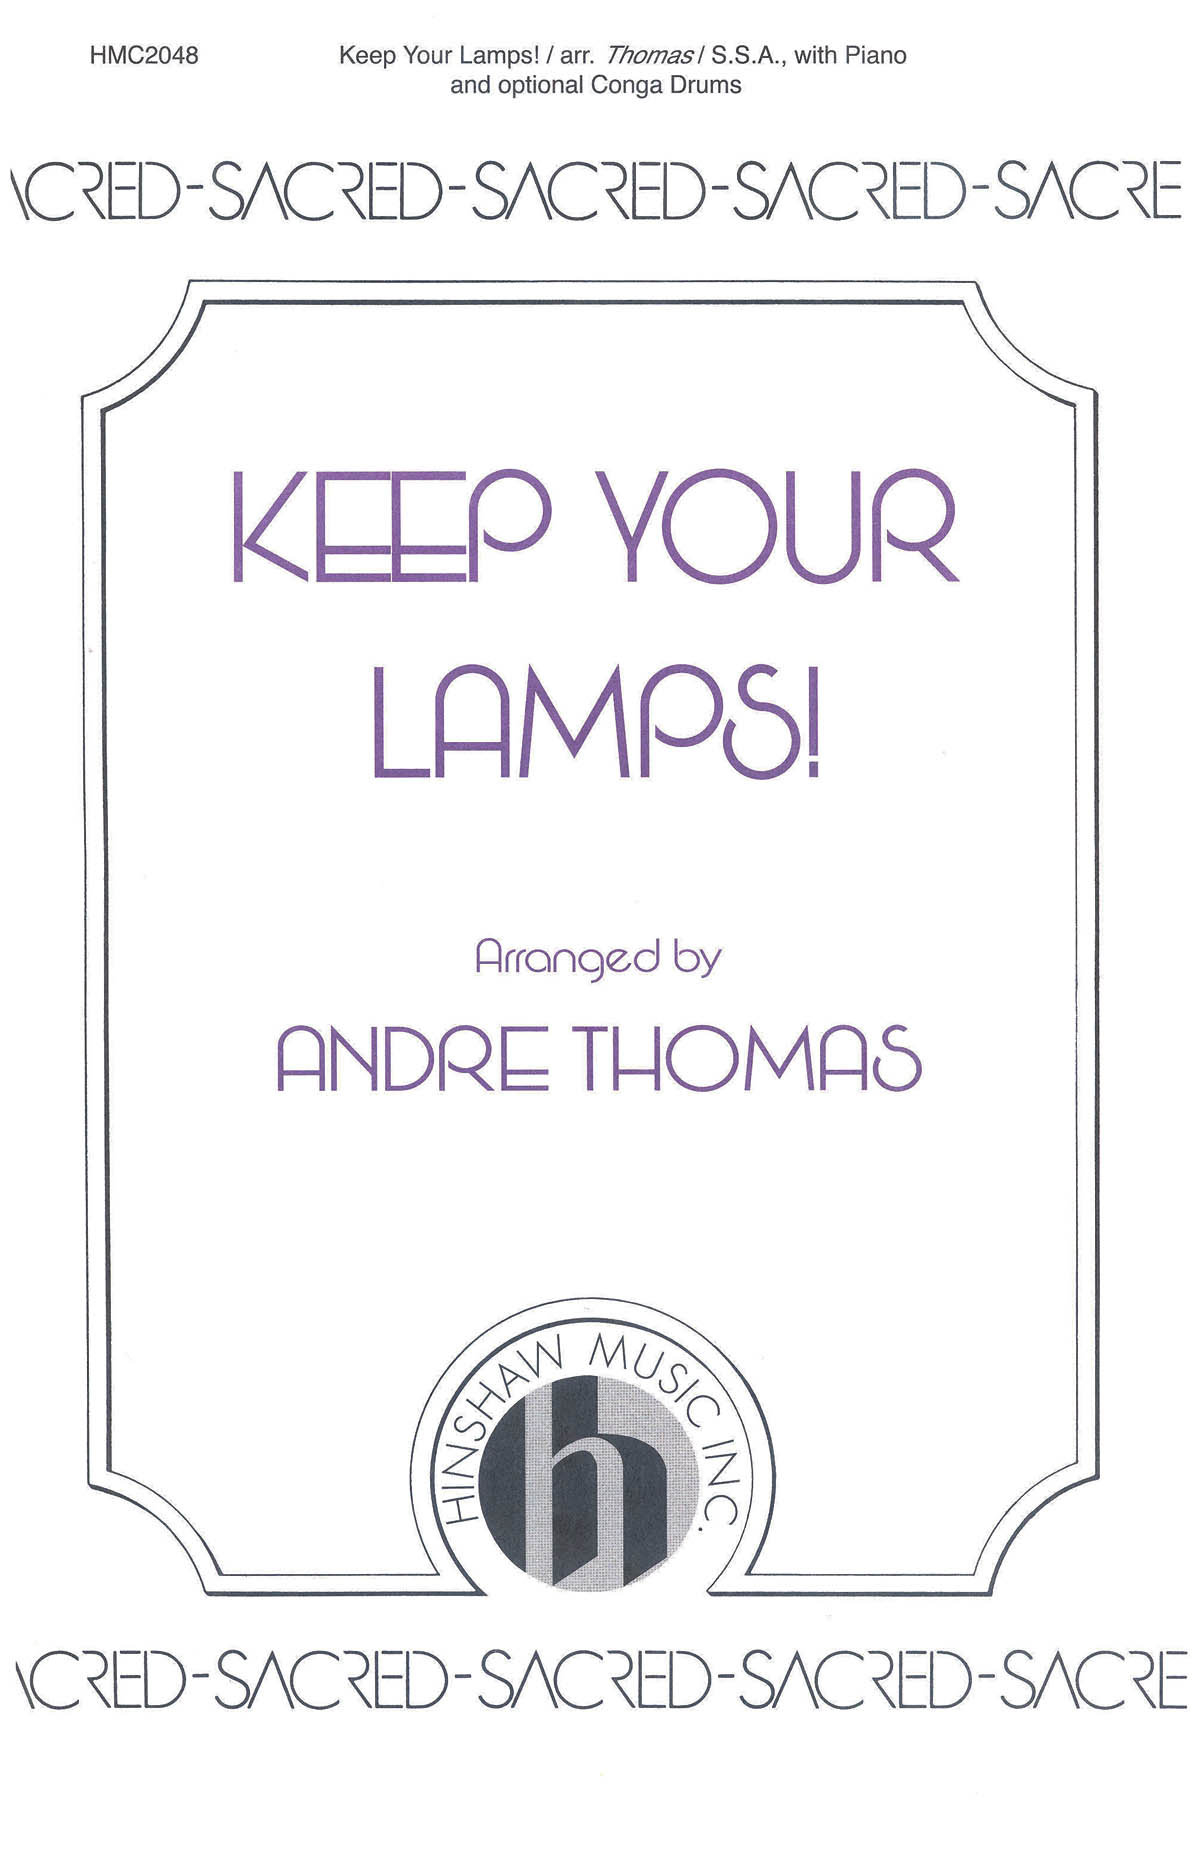 Keep Your Lamps!: SSA: Vocal Score